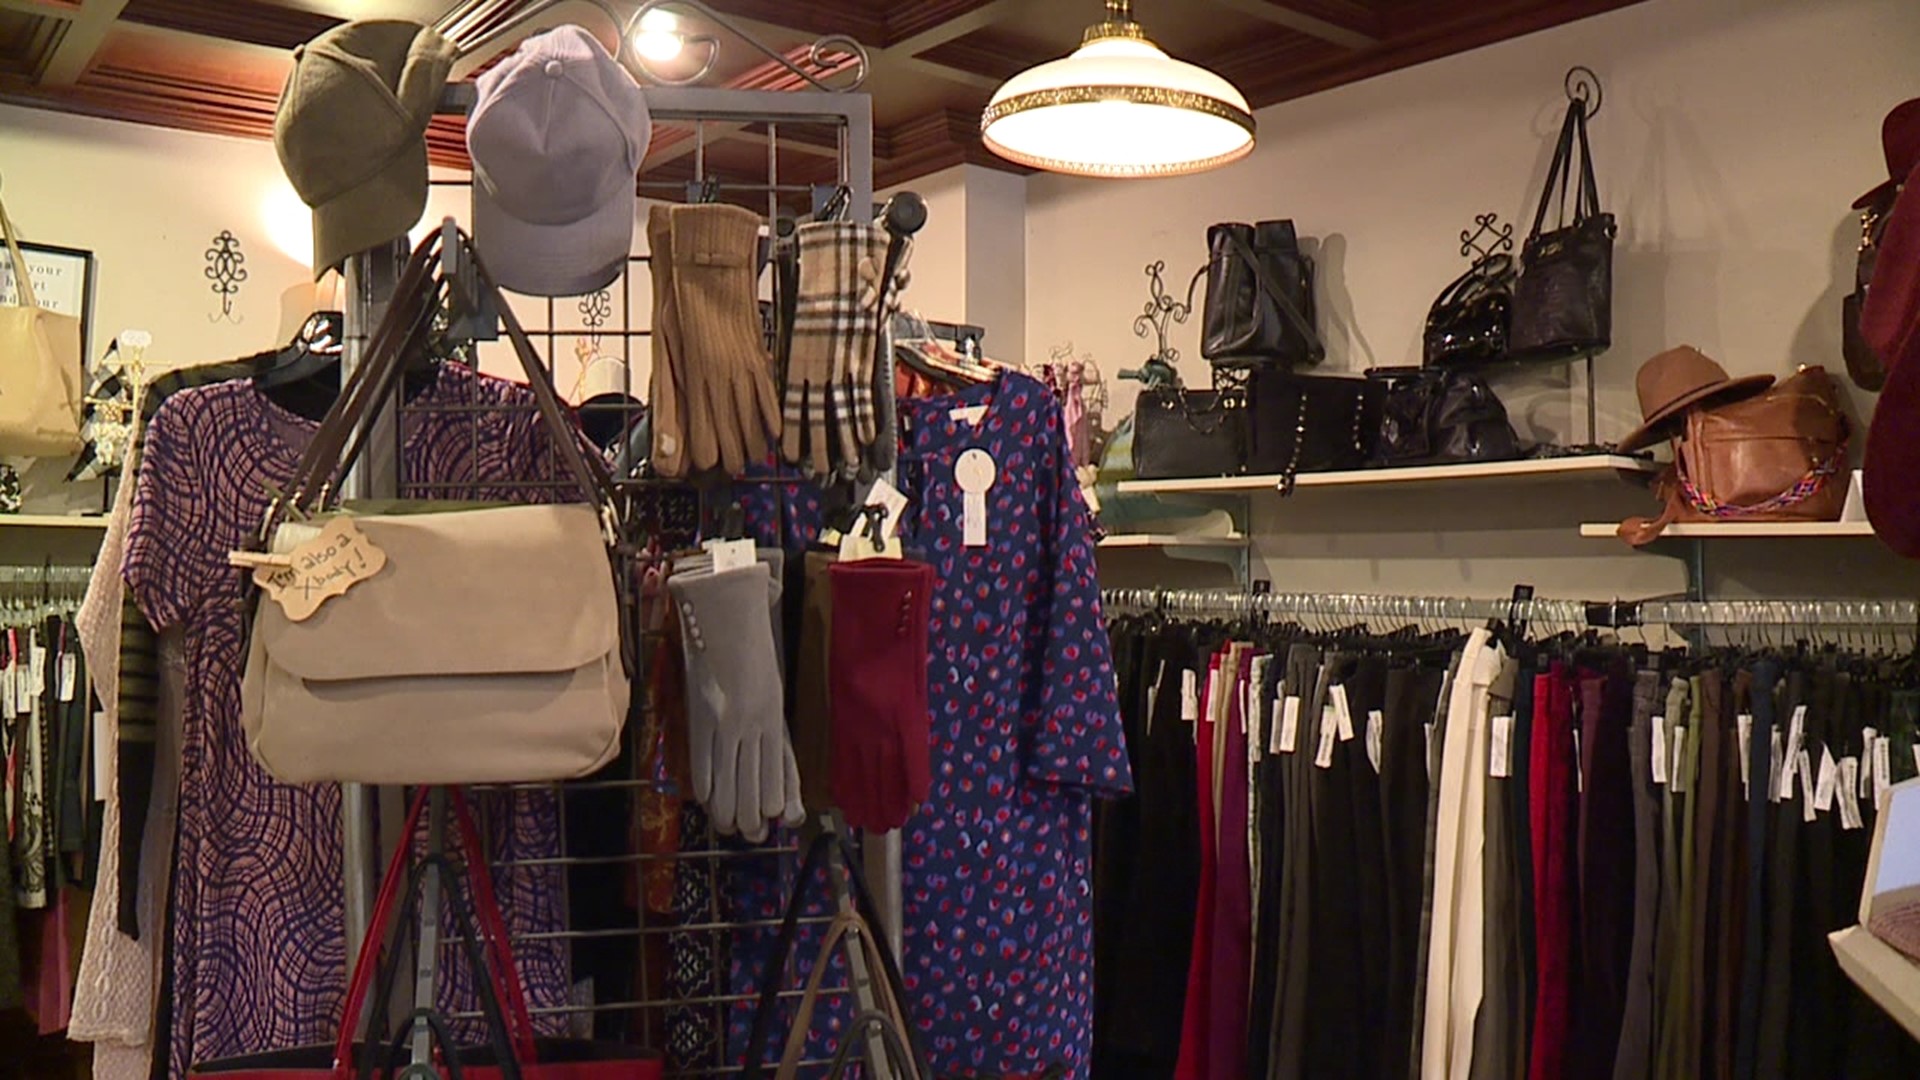 Some holiday shoppers are choosing thrift stores or consignment shops instead of the mall this year.